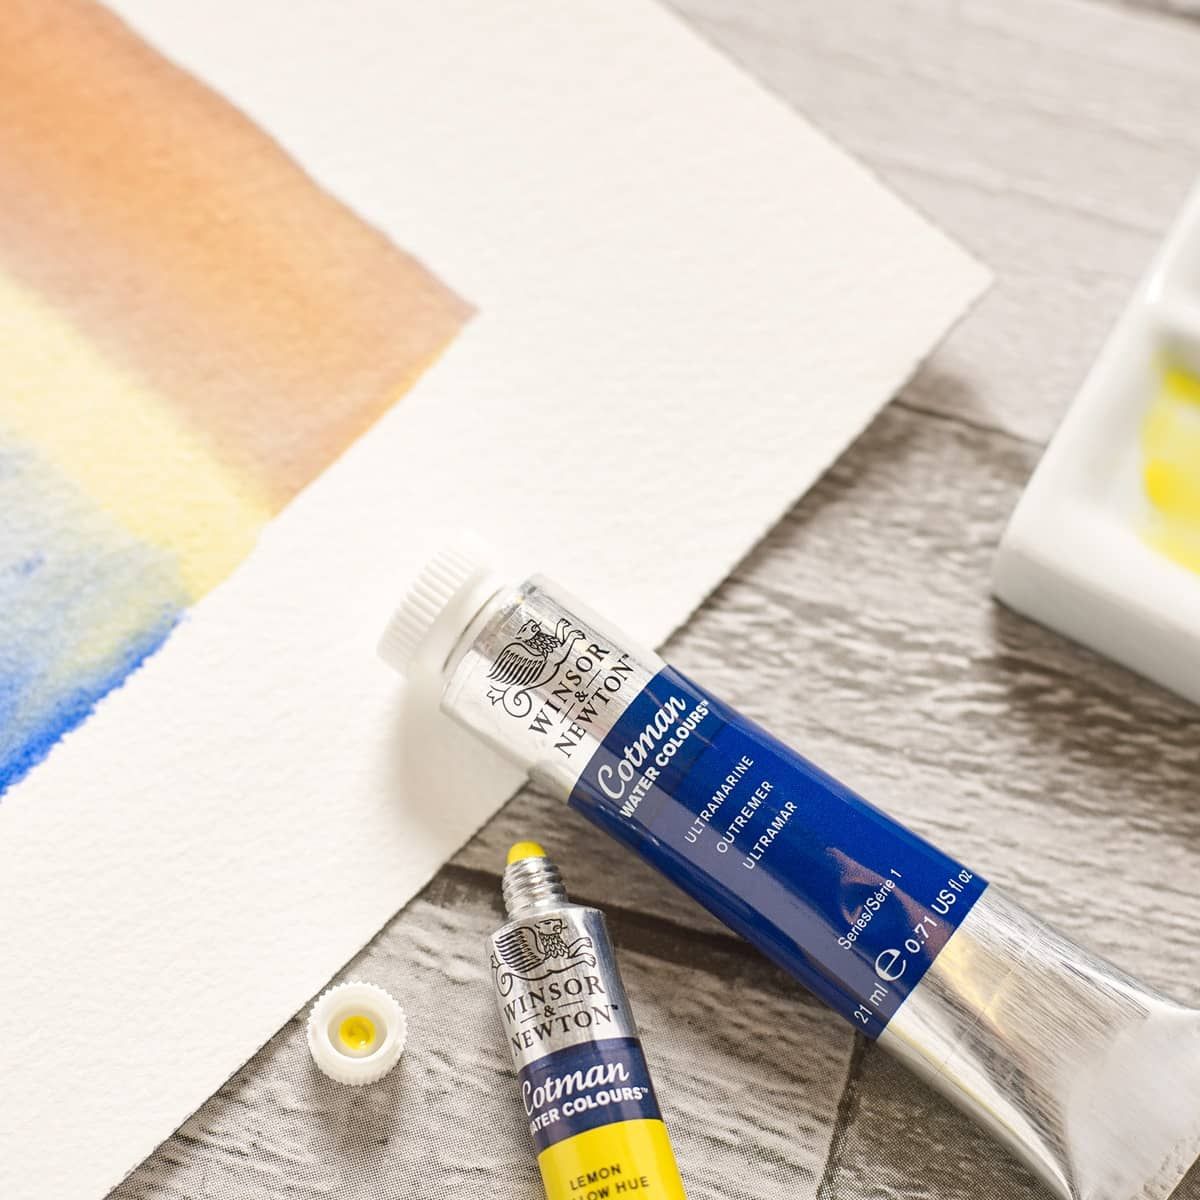 Cotman Water Colours come in 40 beautiful tones